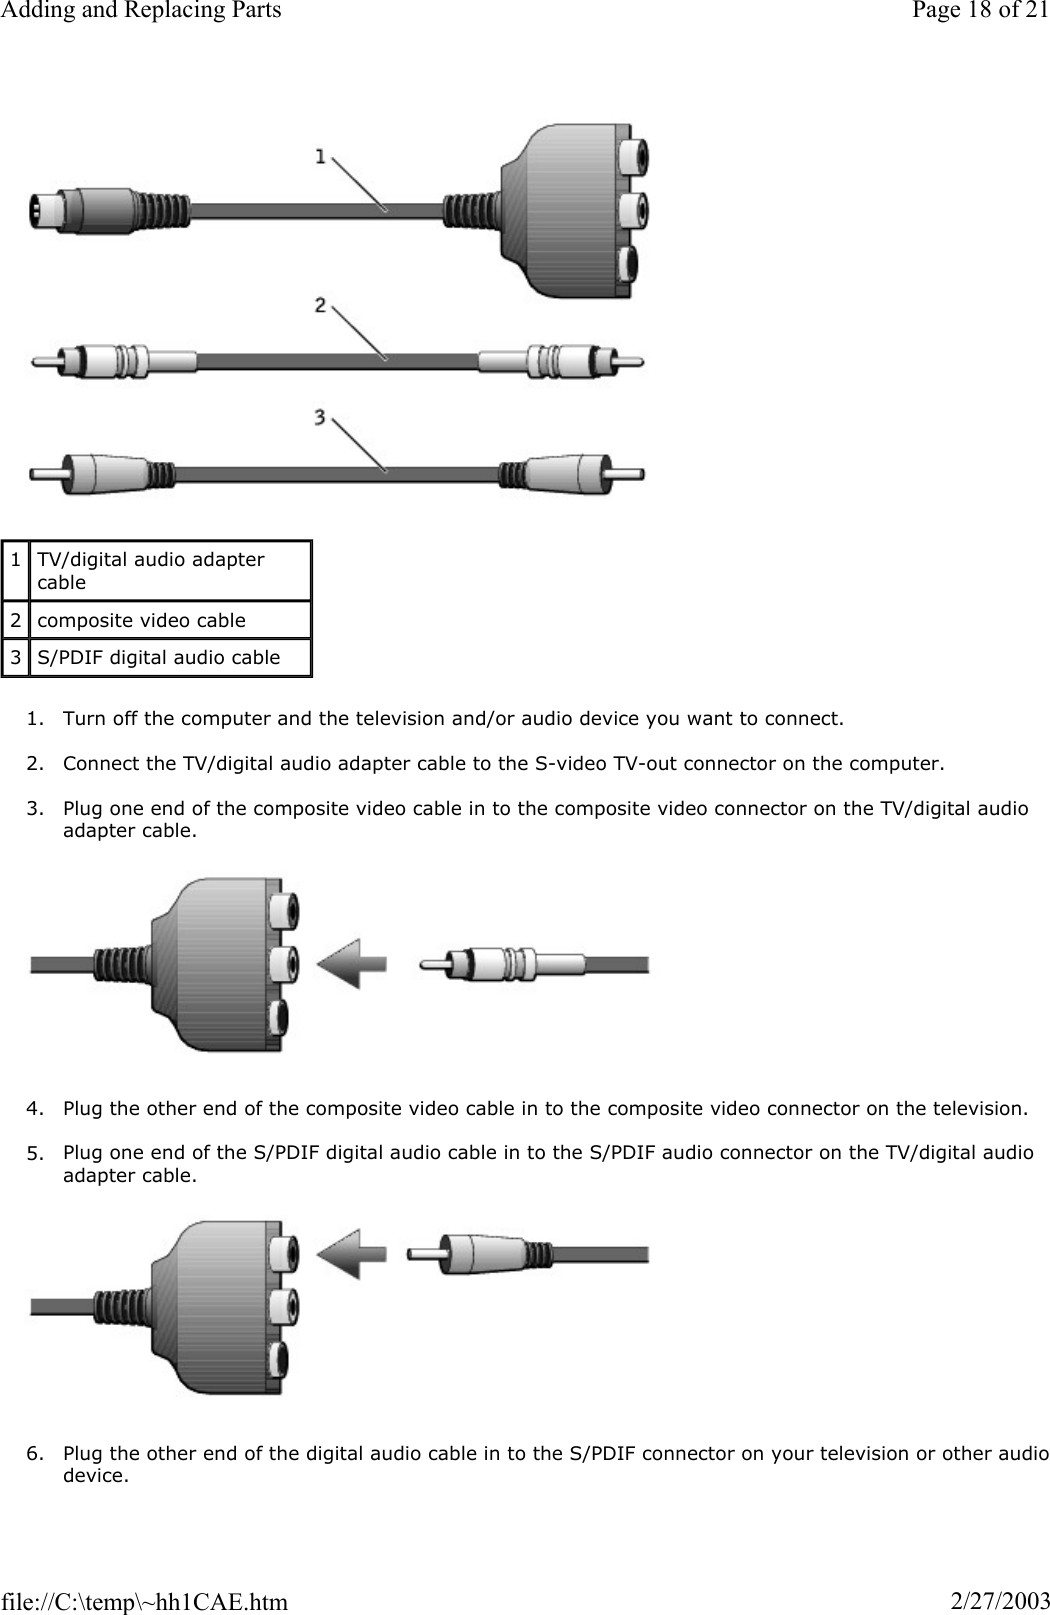 1. Turn off the computer and the television and/or audio device you want to connect. 2. Connect the TV/digital audio adapter cable to the S-video TV-out connector on the computer. 3. Plug one end of the composite video cable in to the composite video connector on the TV/digital audio adapter cable. 4. Plug the other end of the composite video cable in to the composite video connector on the television. 5. Plug one end of the S/PDIF digital audio cable in to the S/PDIF audio connector on the TV/digital audio adapter cable. 6. Plug the other end of the digital audio cable in to the S/PDIF connector on your television or other audiodevice. 1TV/digital audio adapter cable 2composite video cable 3S/PDIF digital audio cable Page 18 of 21Adding and Replacing Parts2/27/2003file://C:\temp\~hh1CAE.htm